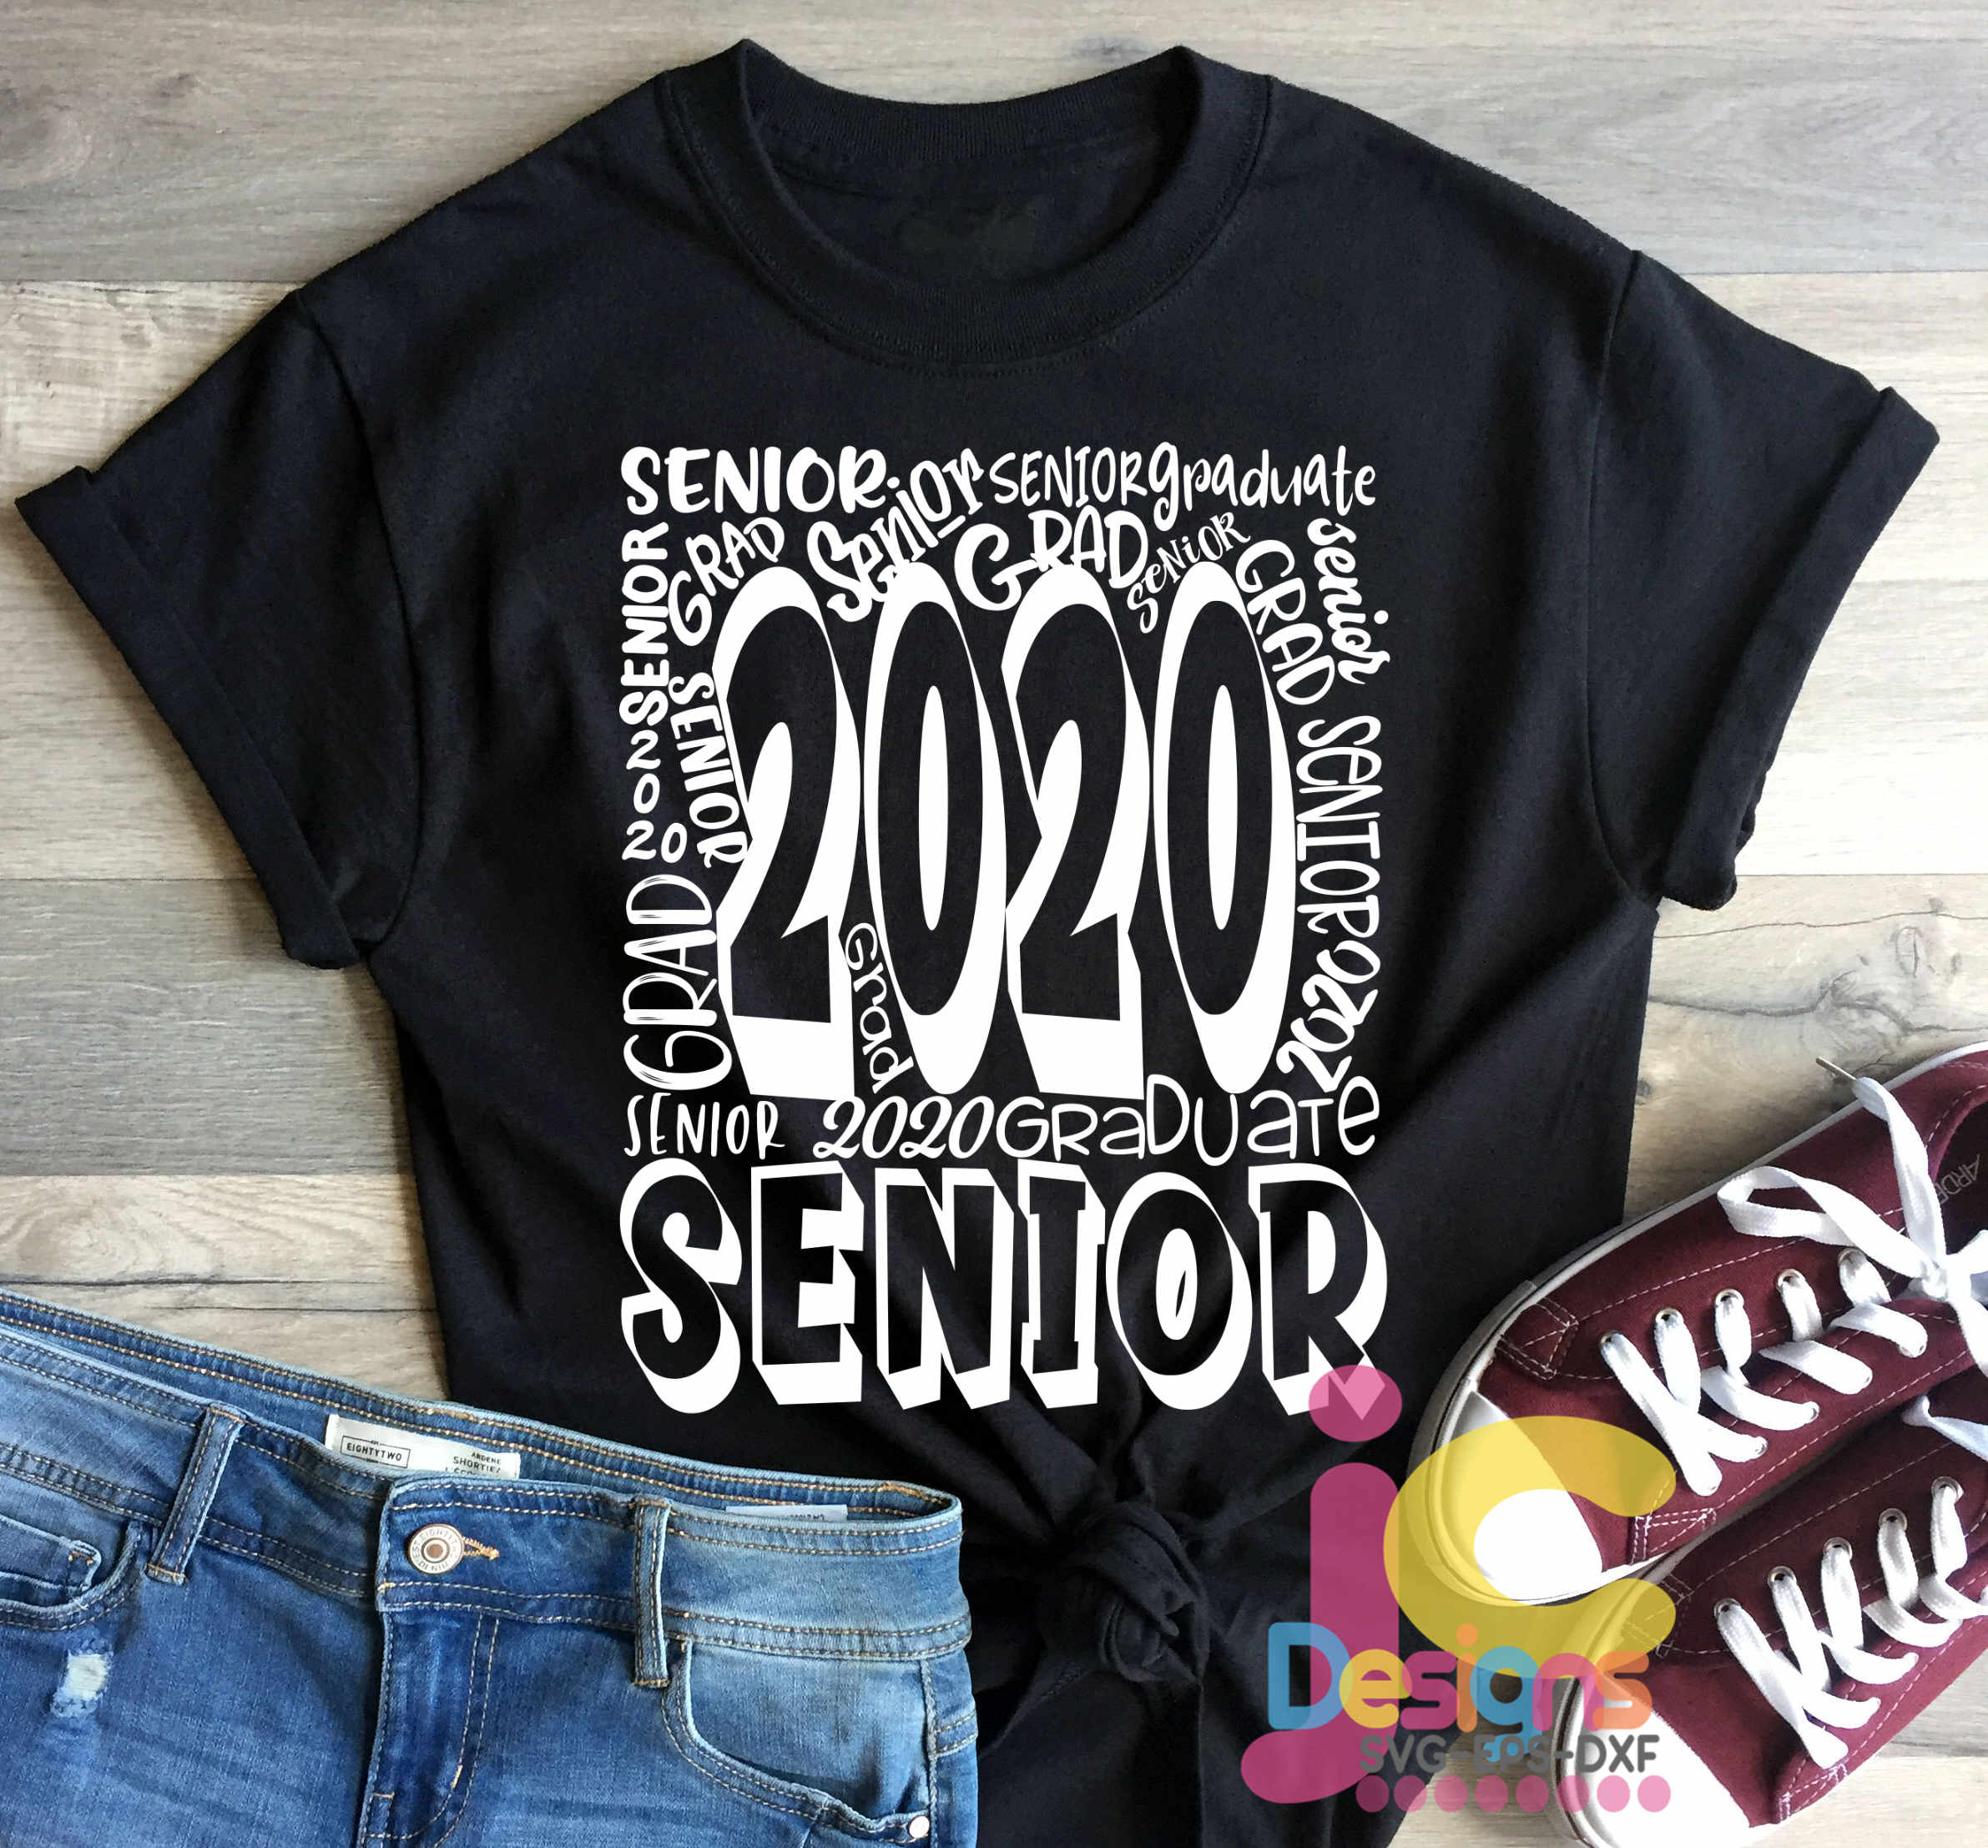 Download Graduation Senior Class Of 2020 Typography SVG, EPS, DXF